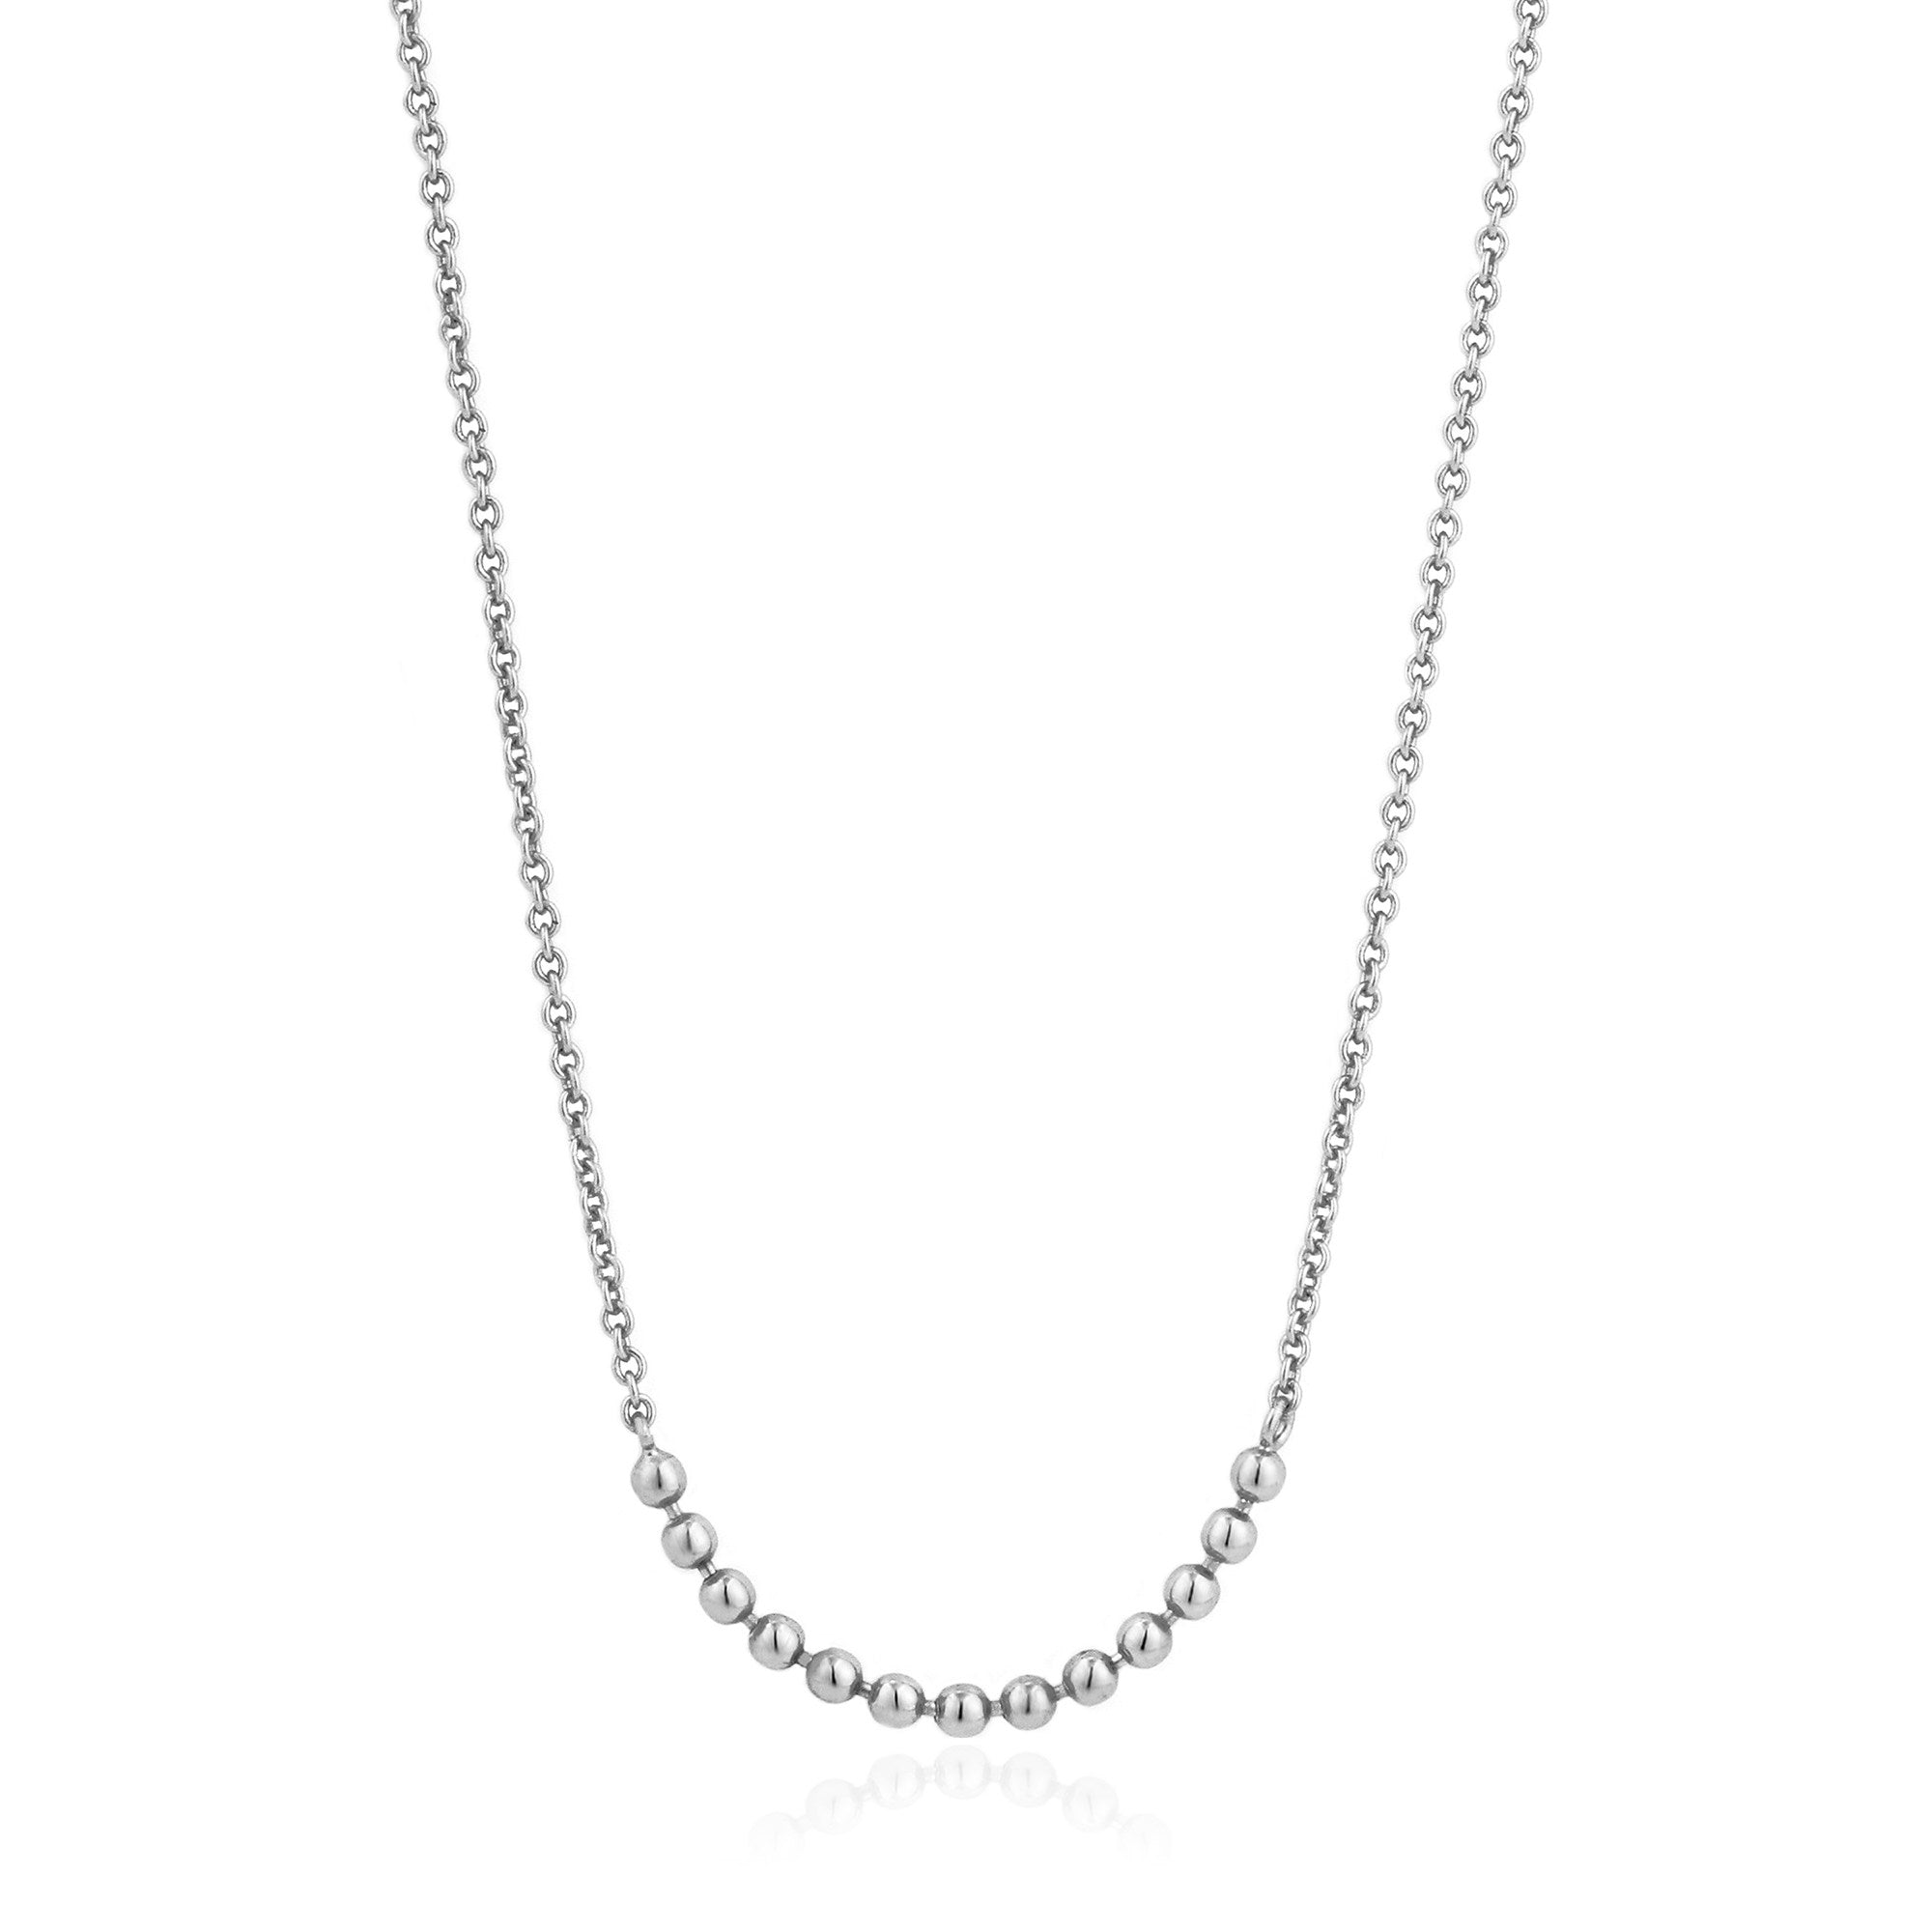 ANIA HAIE ANIA HAIE - Silver Modern Multiple Balls Necklace available at The Good Life Boutique